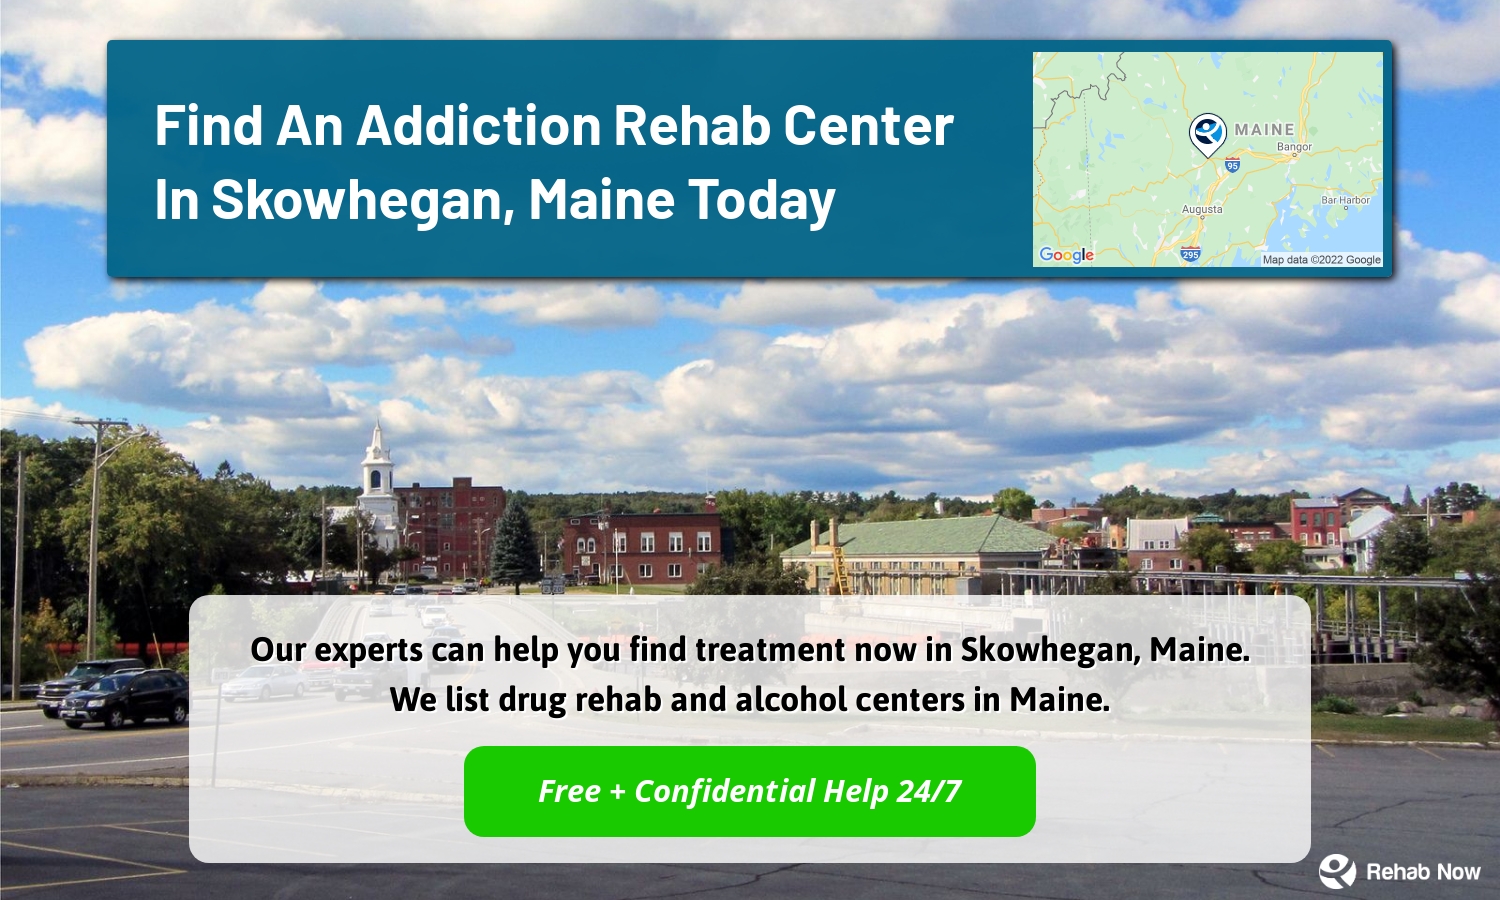 Our experts can help you find treatment now in Skowhegan, Maine. We list drug rehab and alcohol centers in Maine.